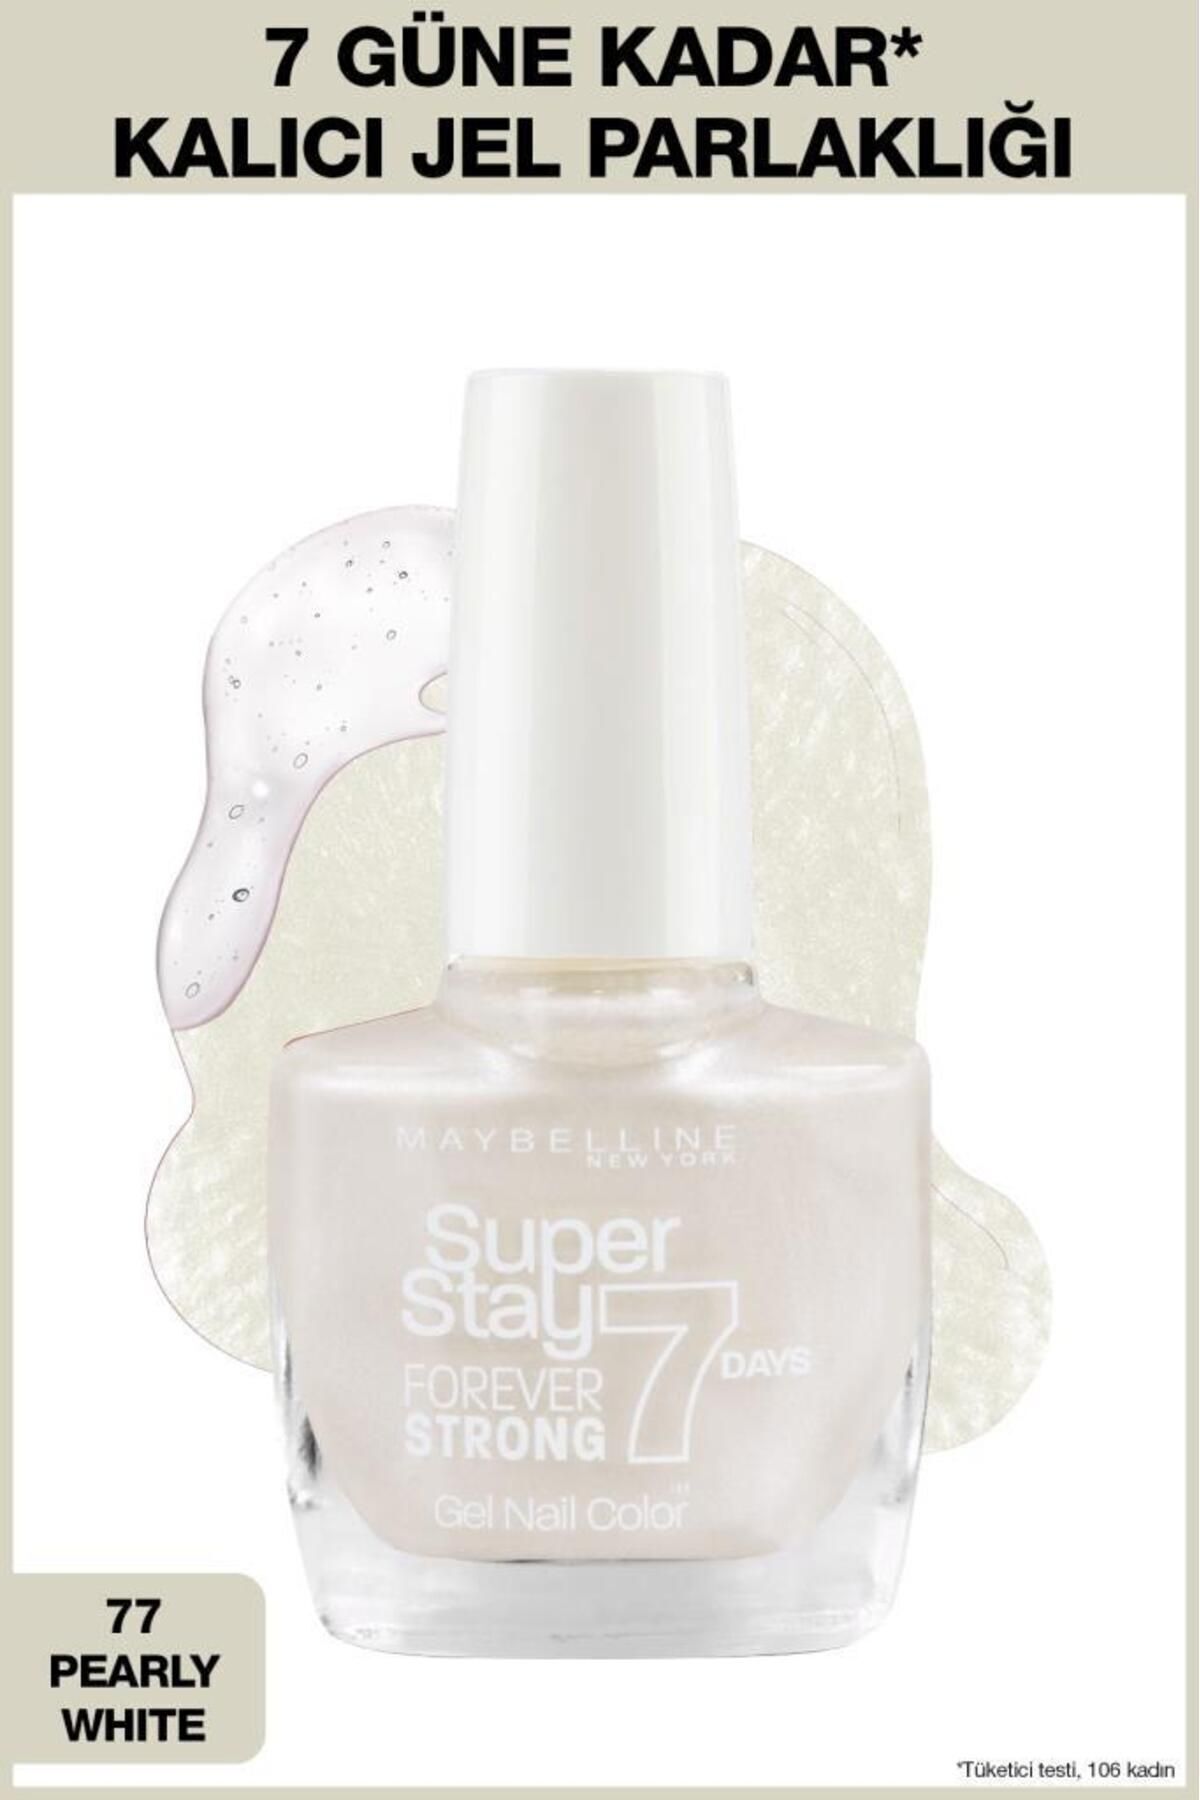 Maybelline New York Super Stay Forever Strong 7 Days Jel Oje - 77 Pearly White